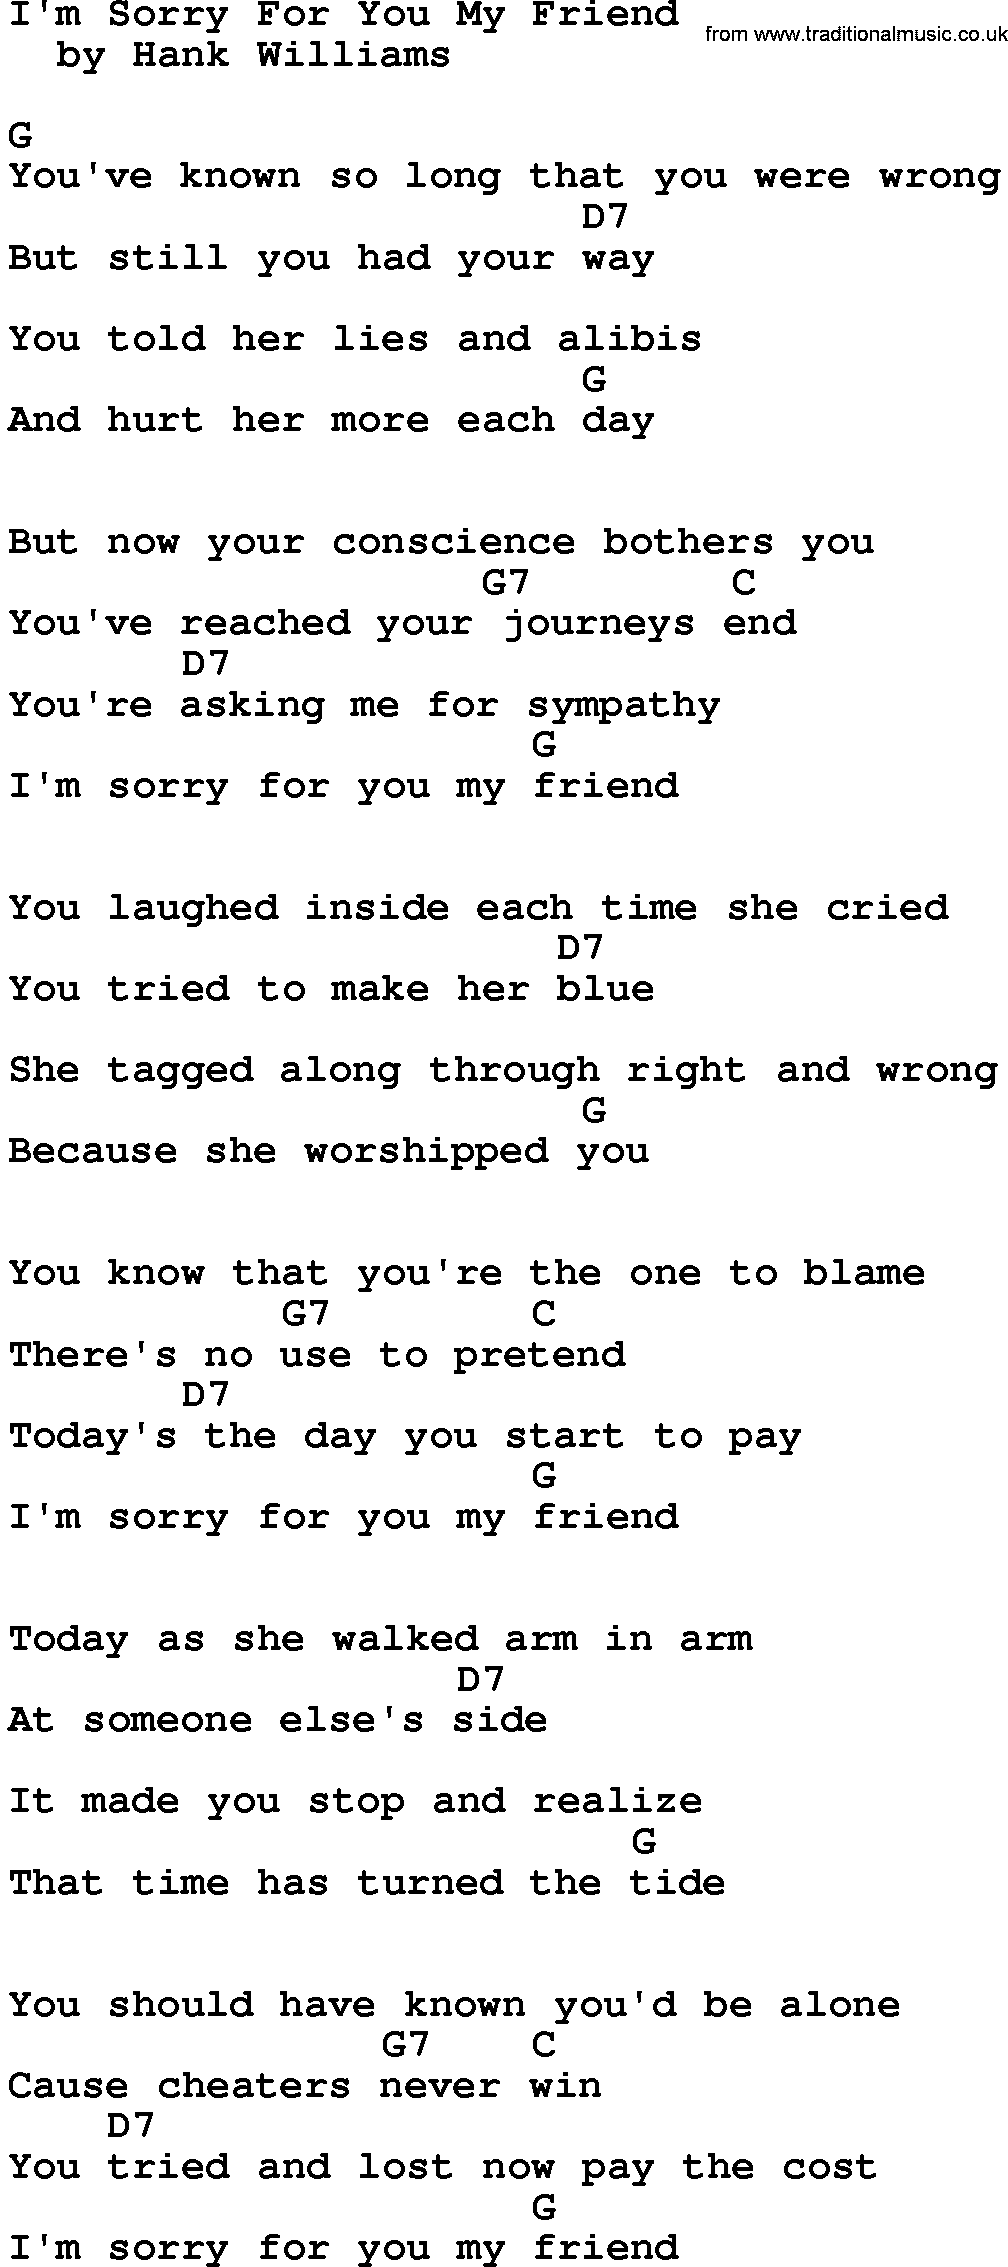 Country music song: I'm Sorry For You My Friend lyrics and chords